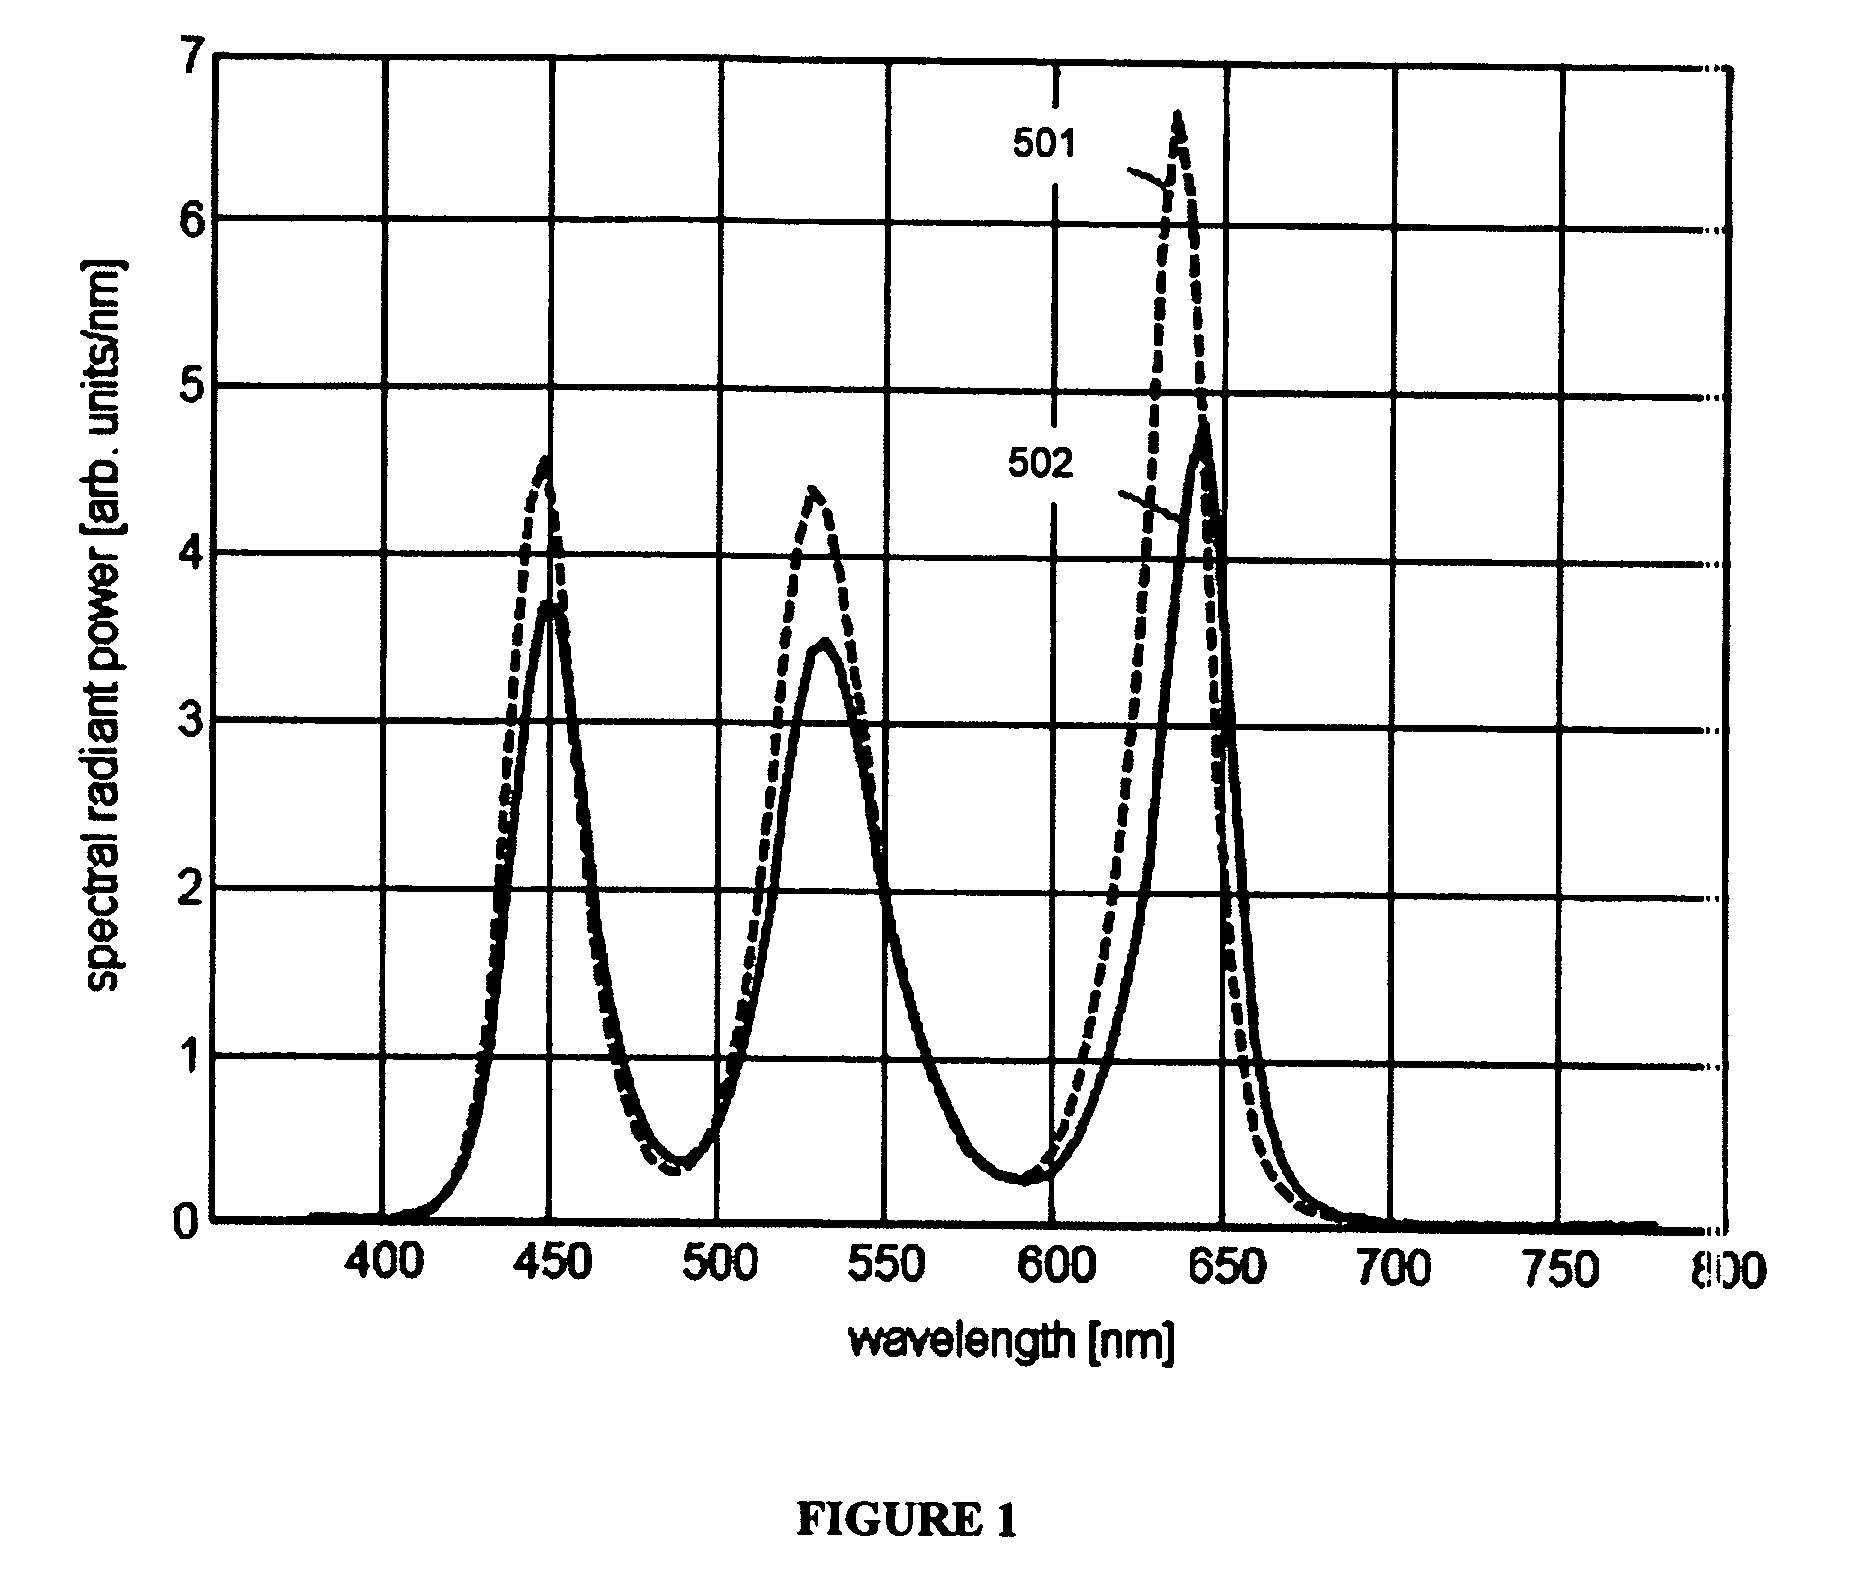 Method and apparatus for determining intensities and peak wavelengths of light